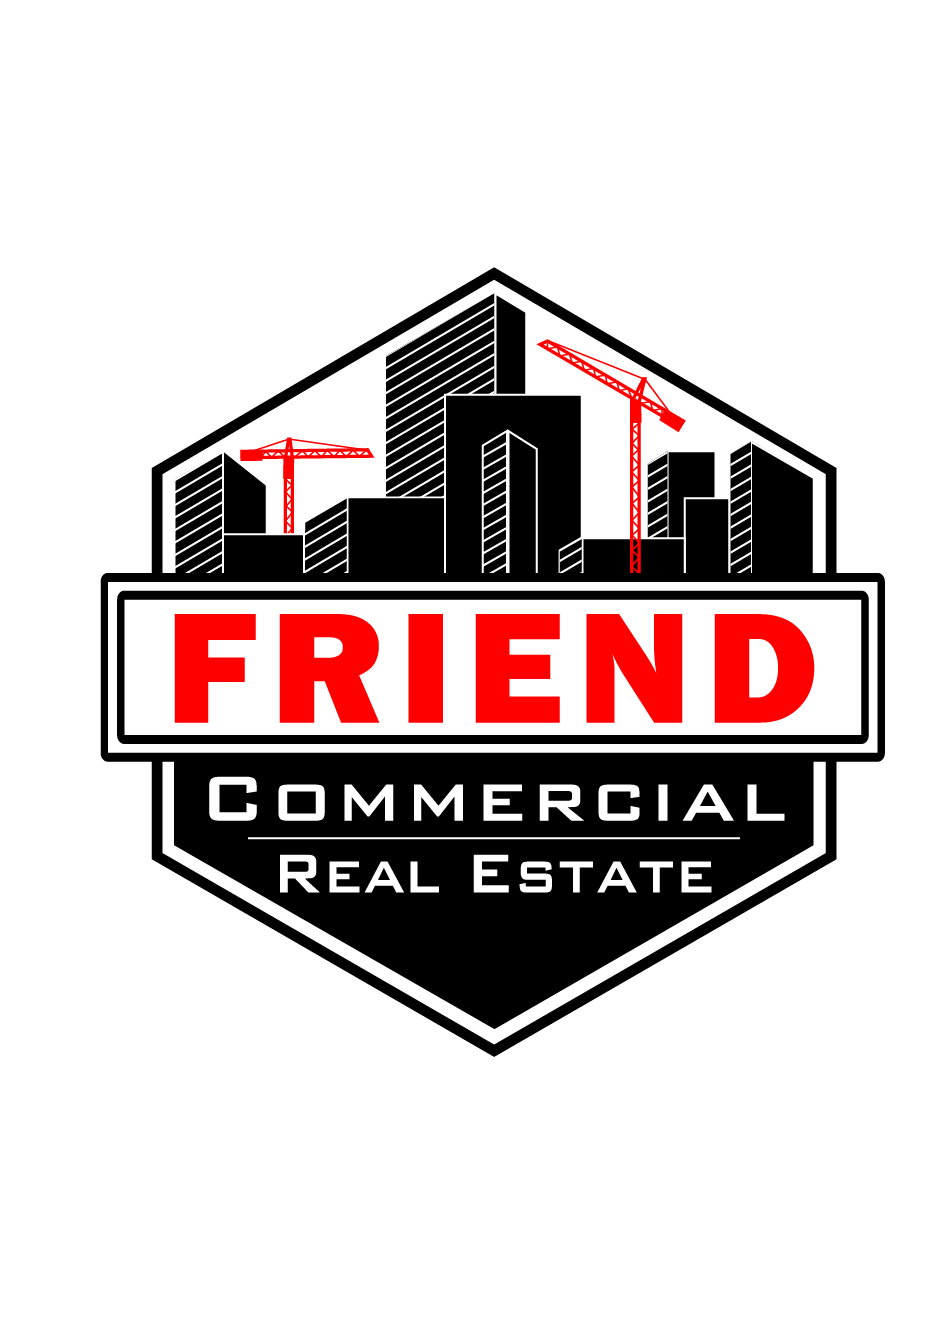 Friend Commercial Real Estate